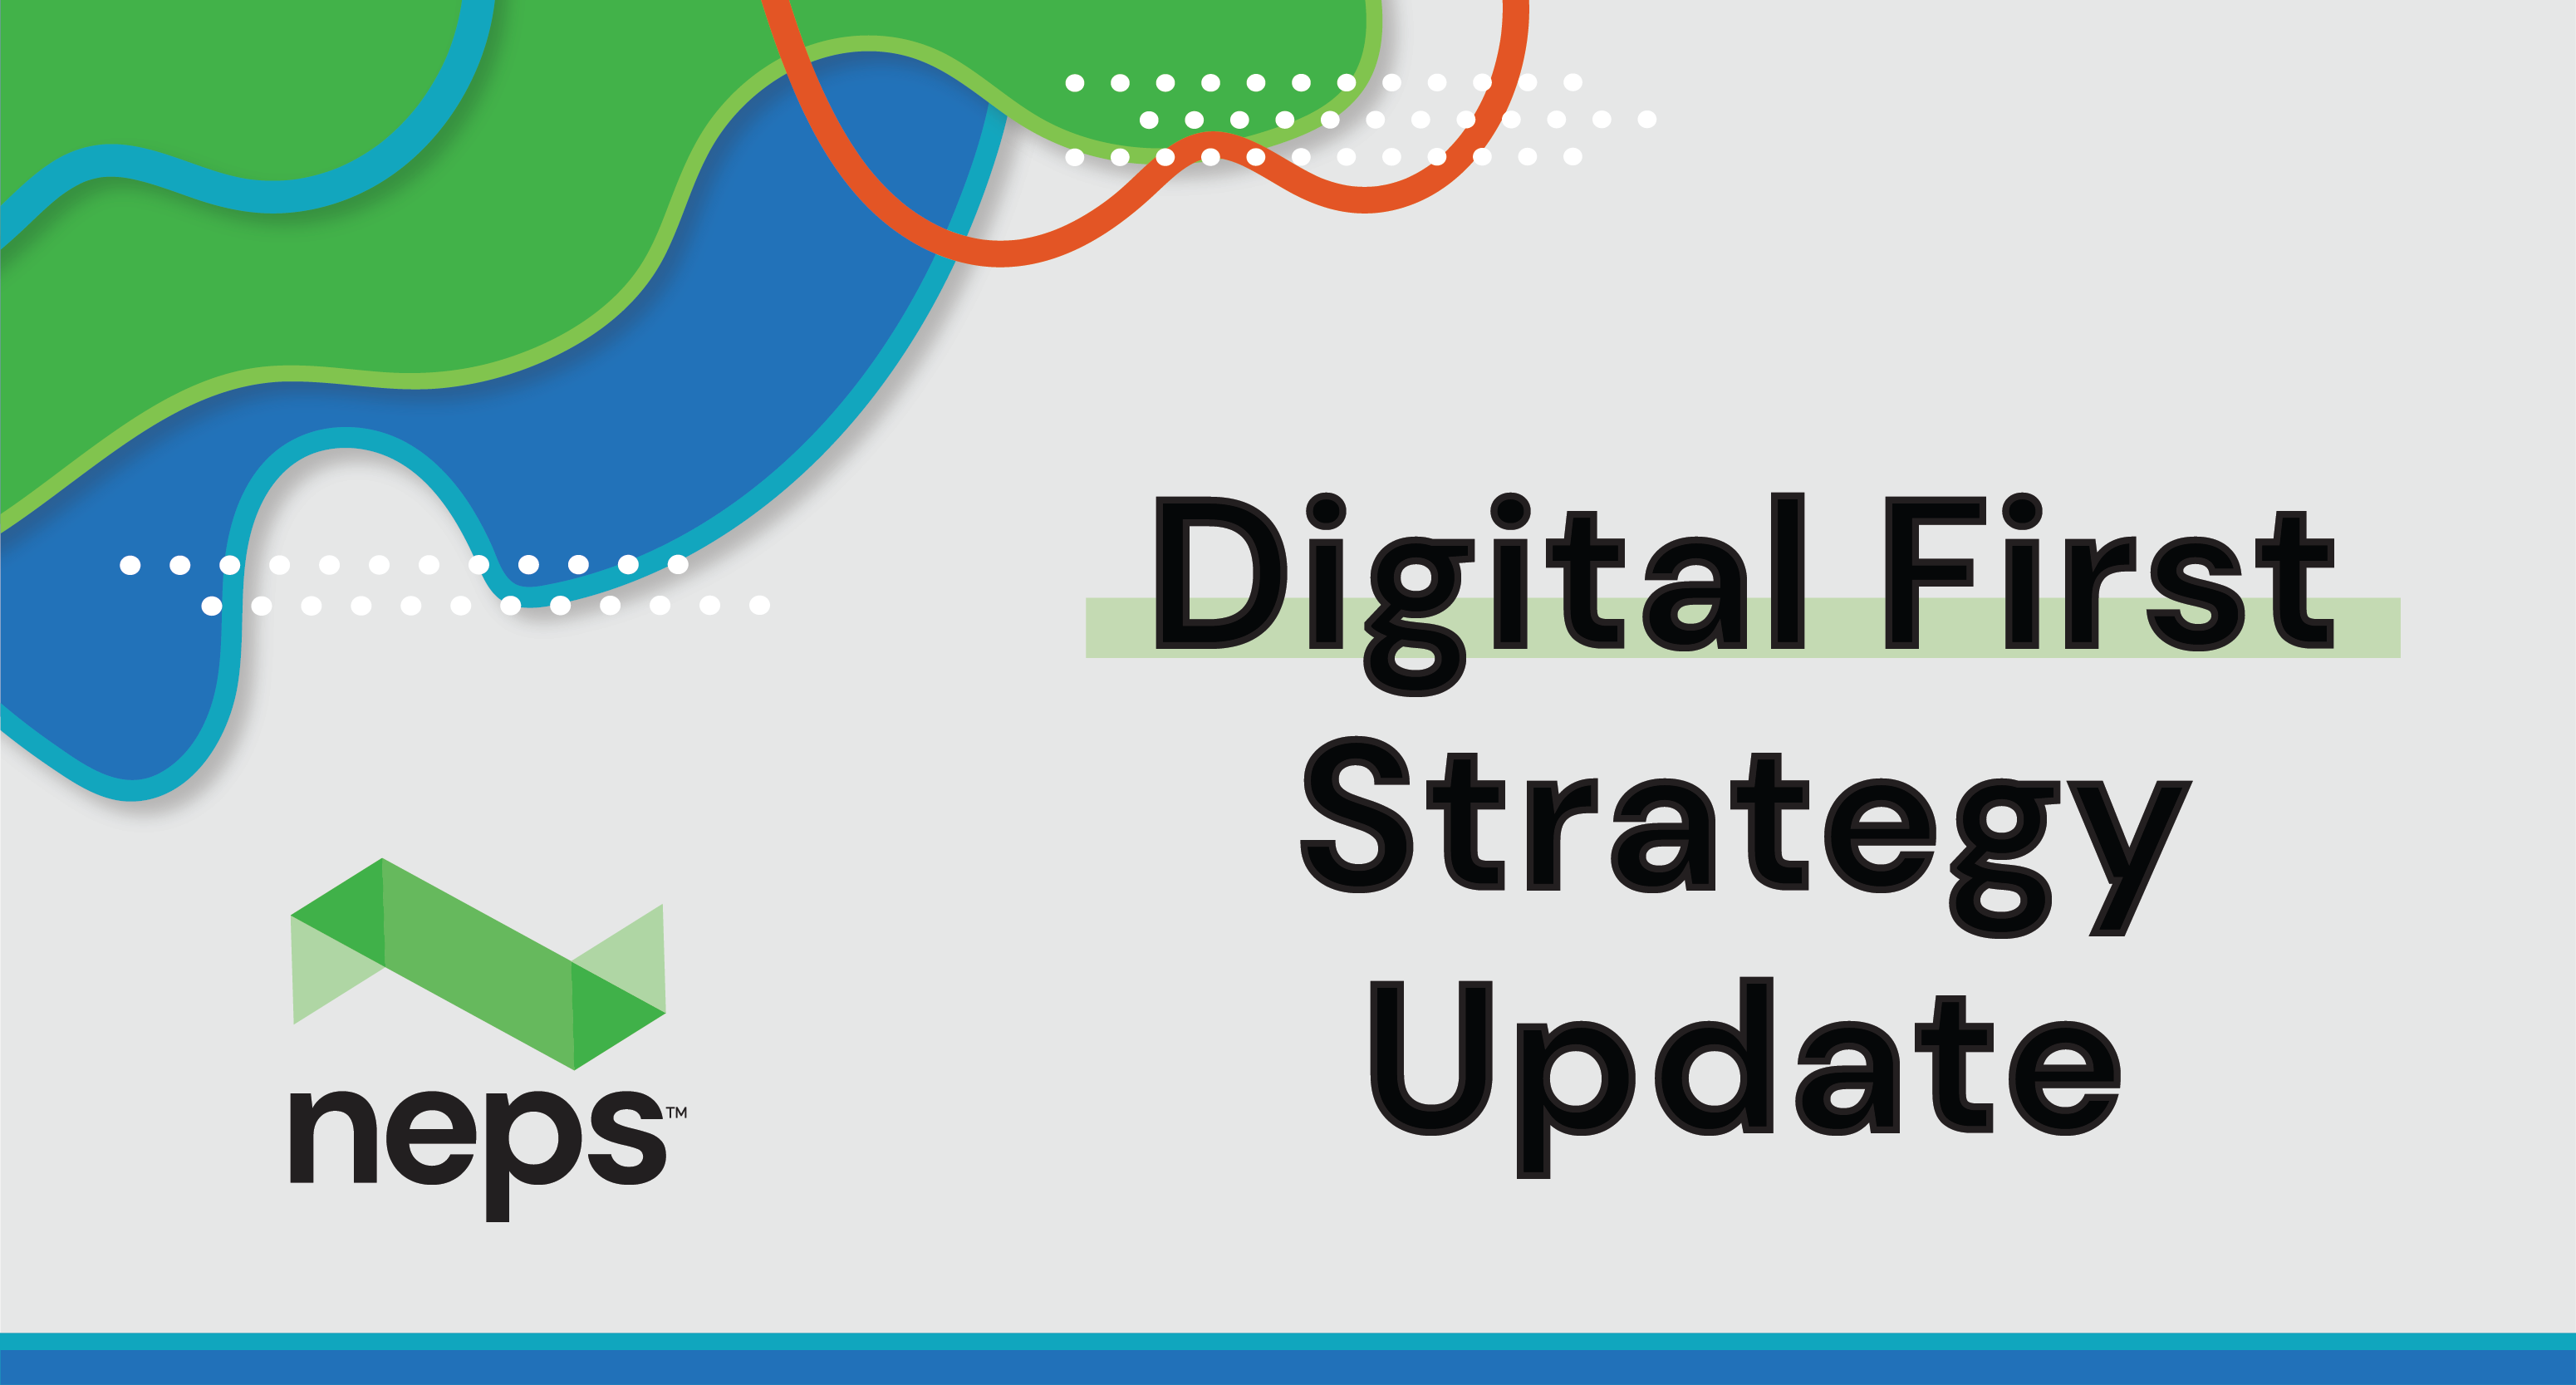 Wavy blobs in green and blue with wavy orange and blue lines and white dots, Digital First Strategy Update, neps logo